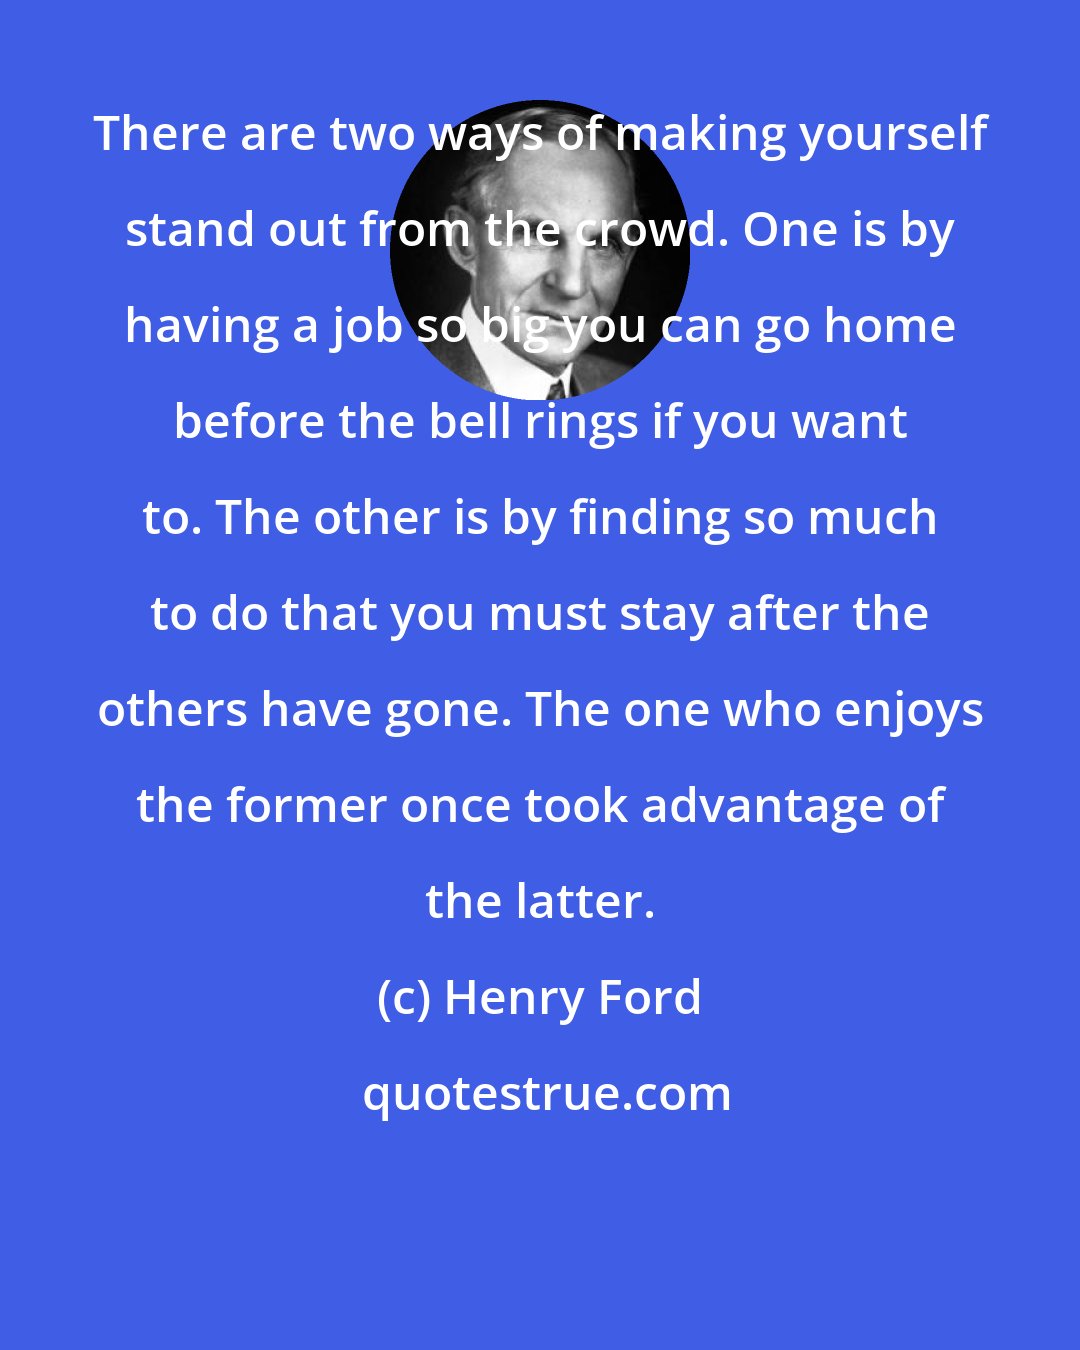 Henry Ford: There are two ways of making yourself stand out from the crowd. One is by having a job so big you can go home before the bell rings if you want to. The other is by finding so much to do that you must stay after the others have gone. The one who enjoys the former once took advantage of the latter.